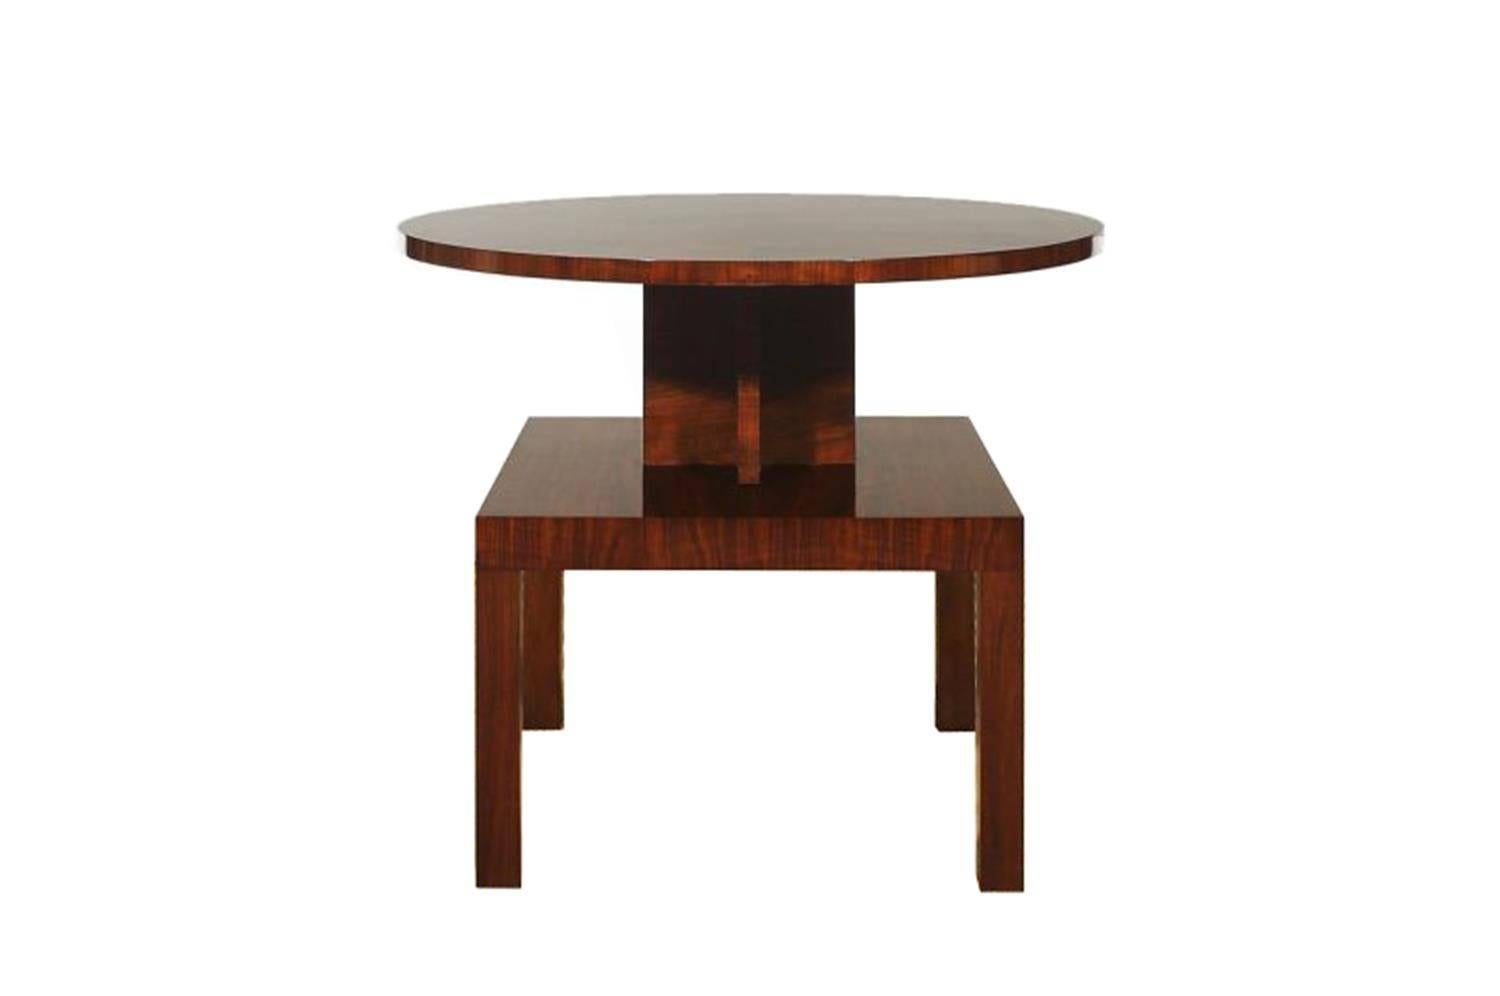 French Vintage Art Deco Side Table Made of Mahogany and Walnut